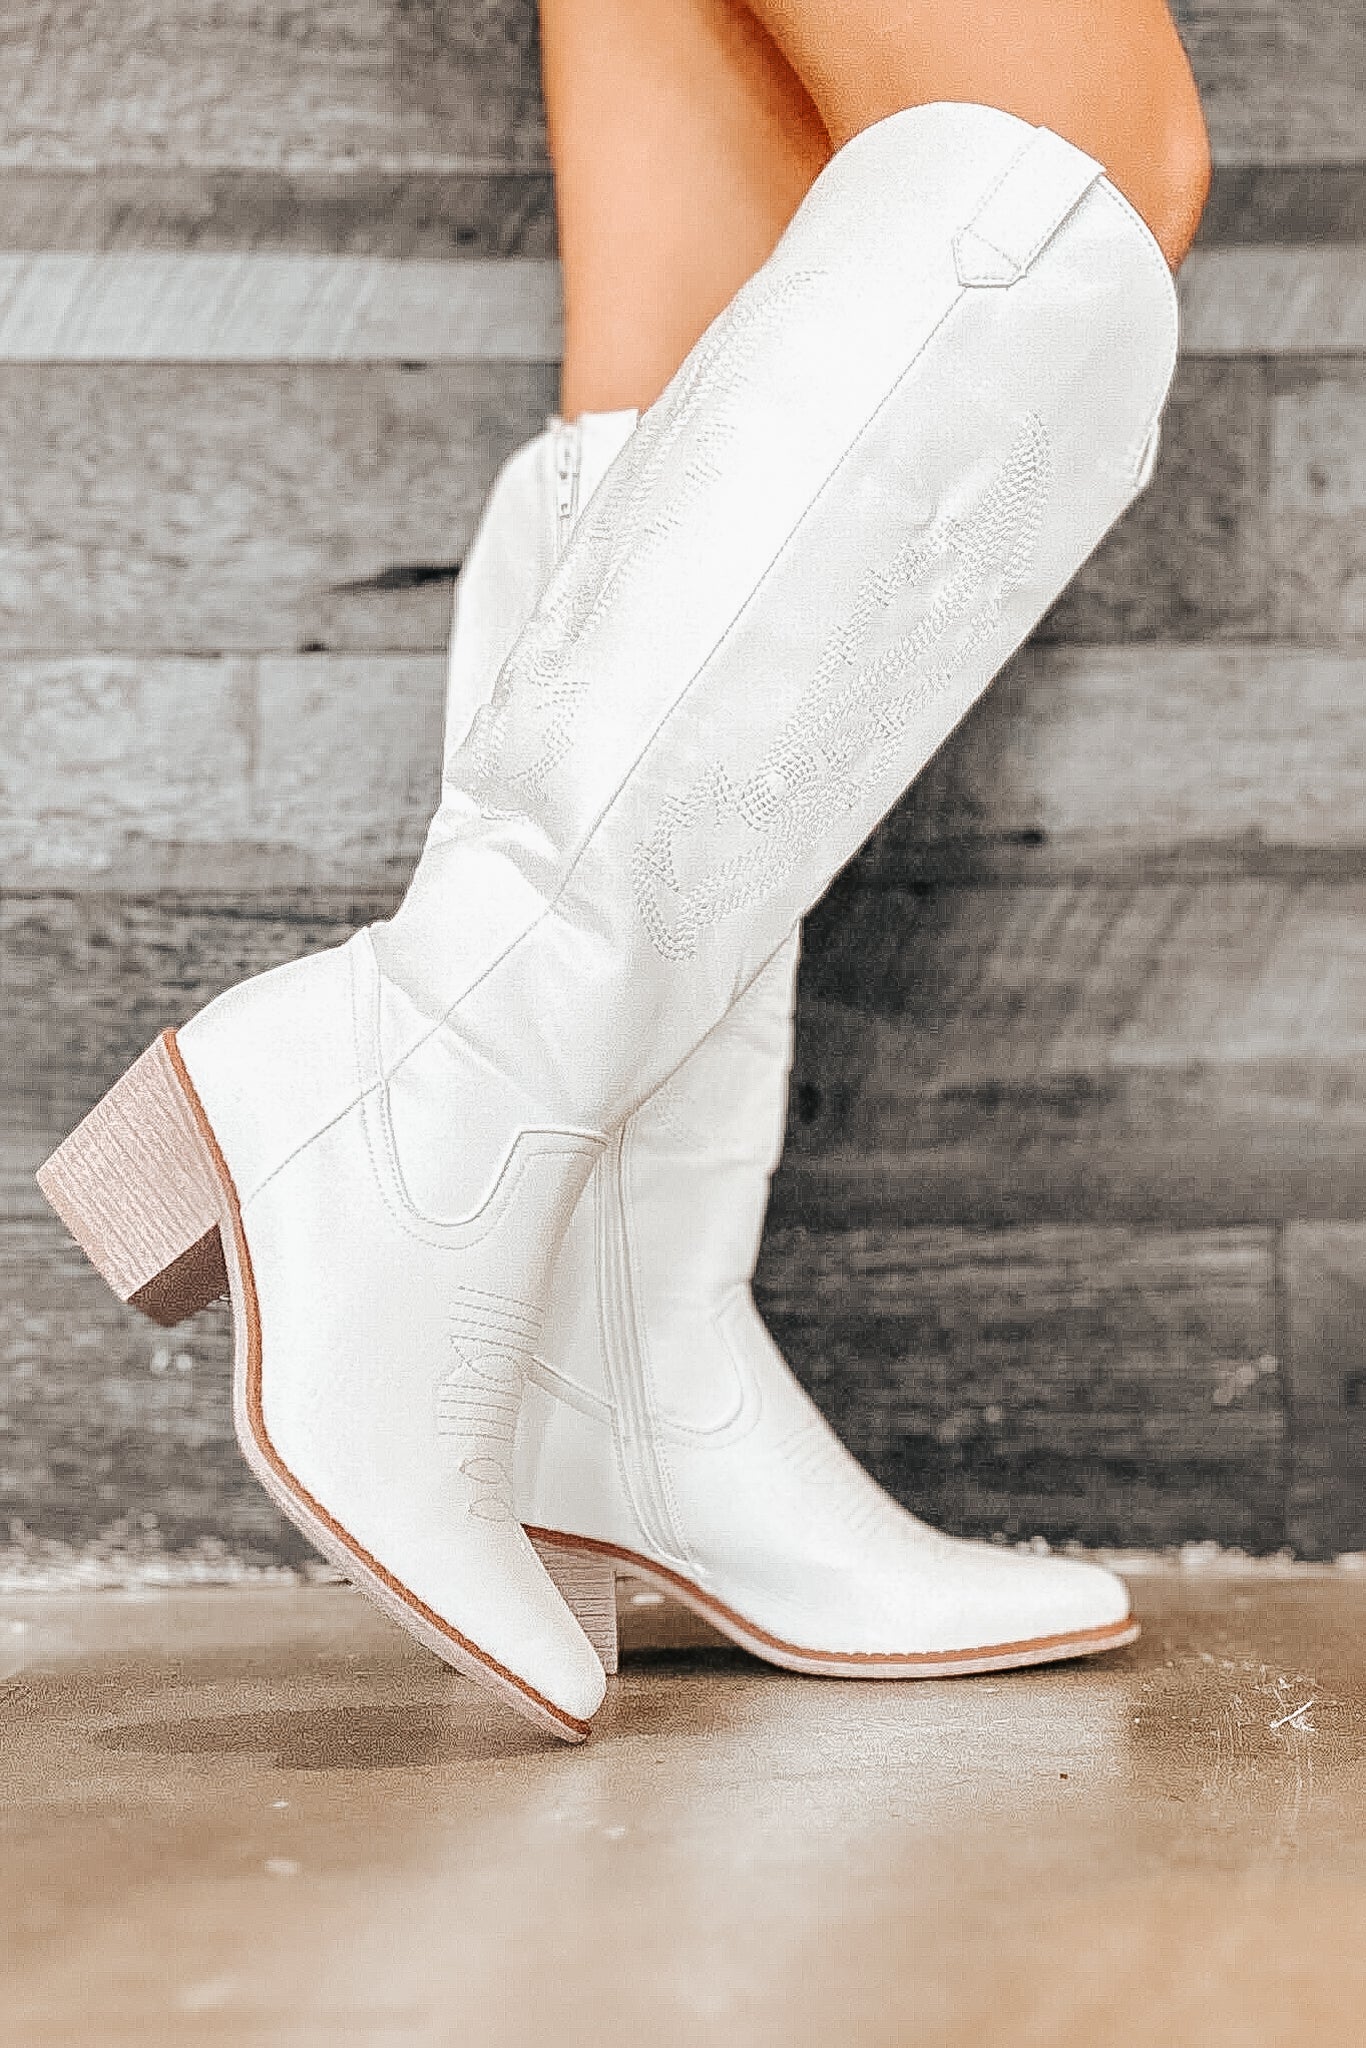 Nashville Night Out White Cowgirl Boots